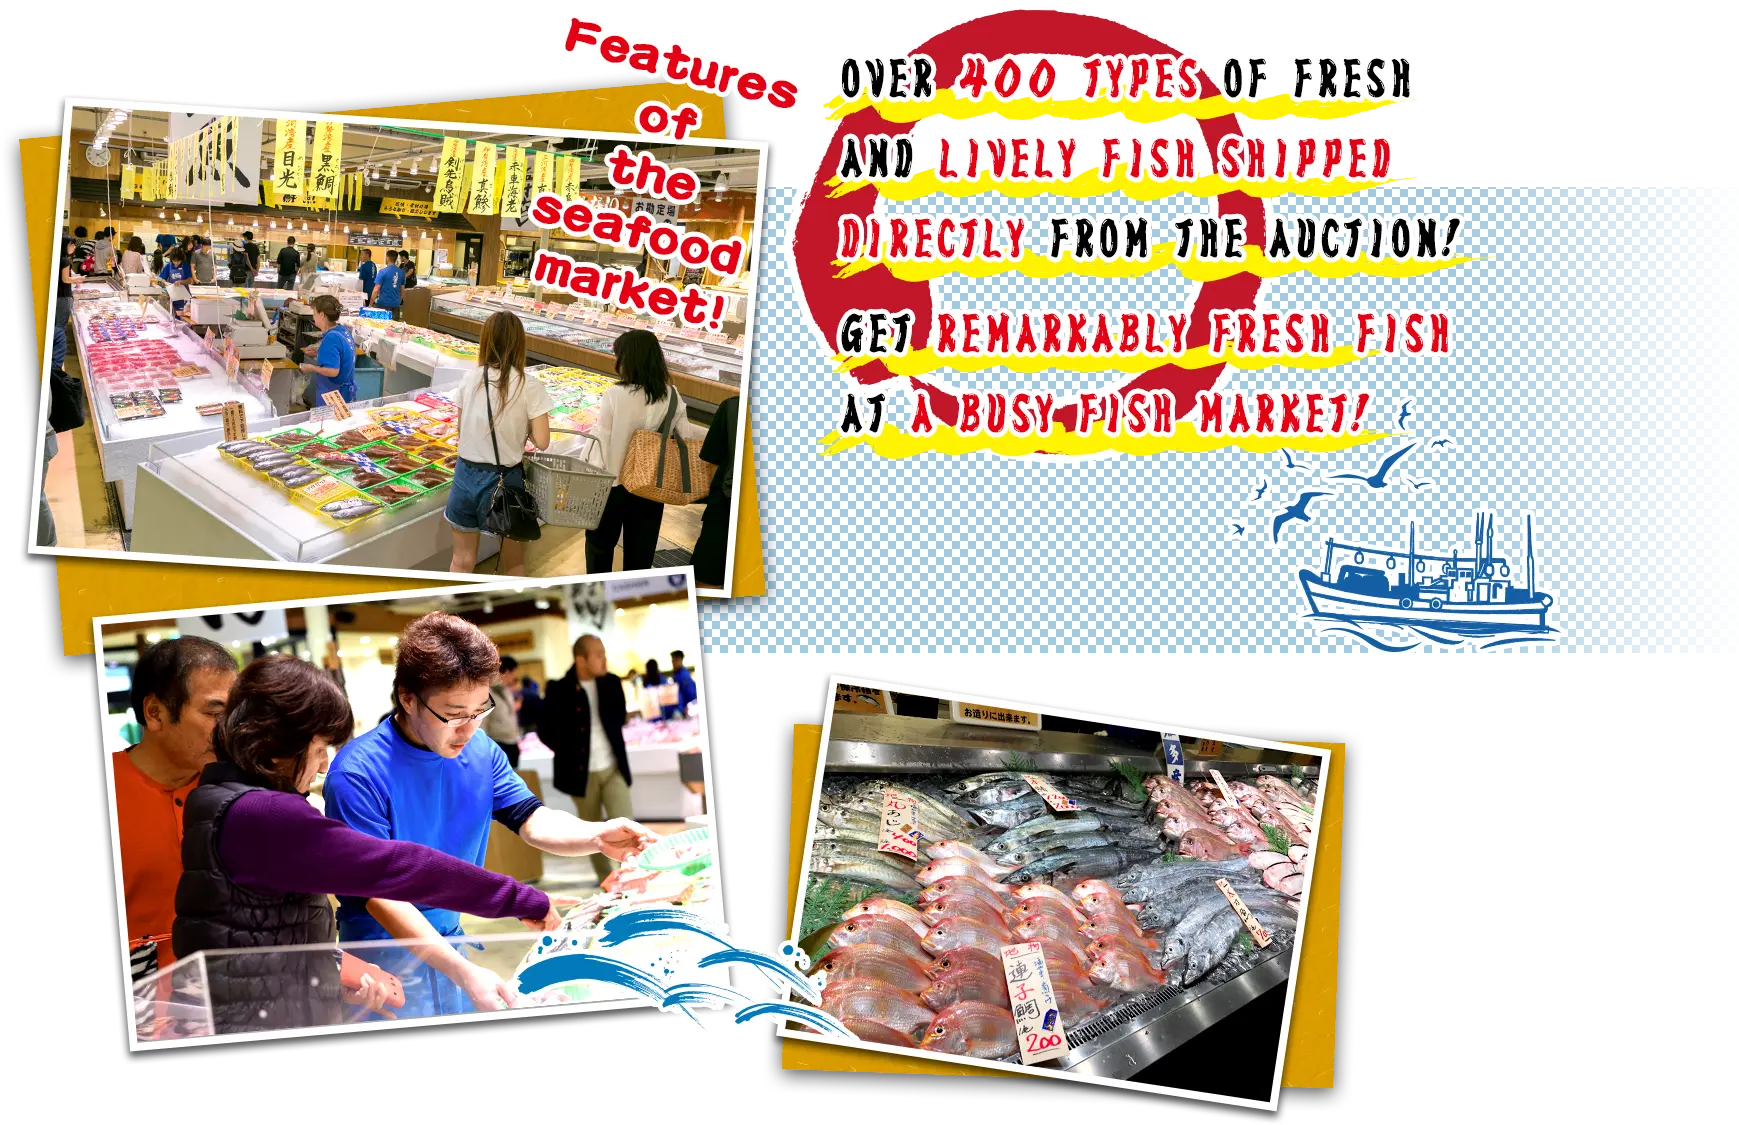 Features of the seafood market! OVER 400 TYPES OF FRESH AND LIVELY FISH SHIPPED DIRECTLY FROM THE AUCTION! GET REMARKABLY FRESH FISH AT A BUSY FISH MARKET!